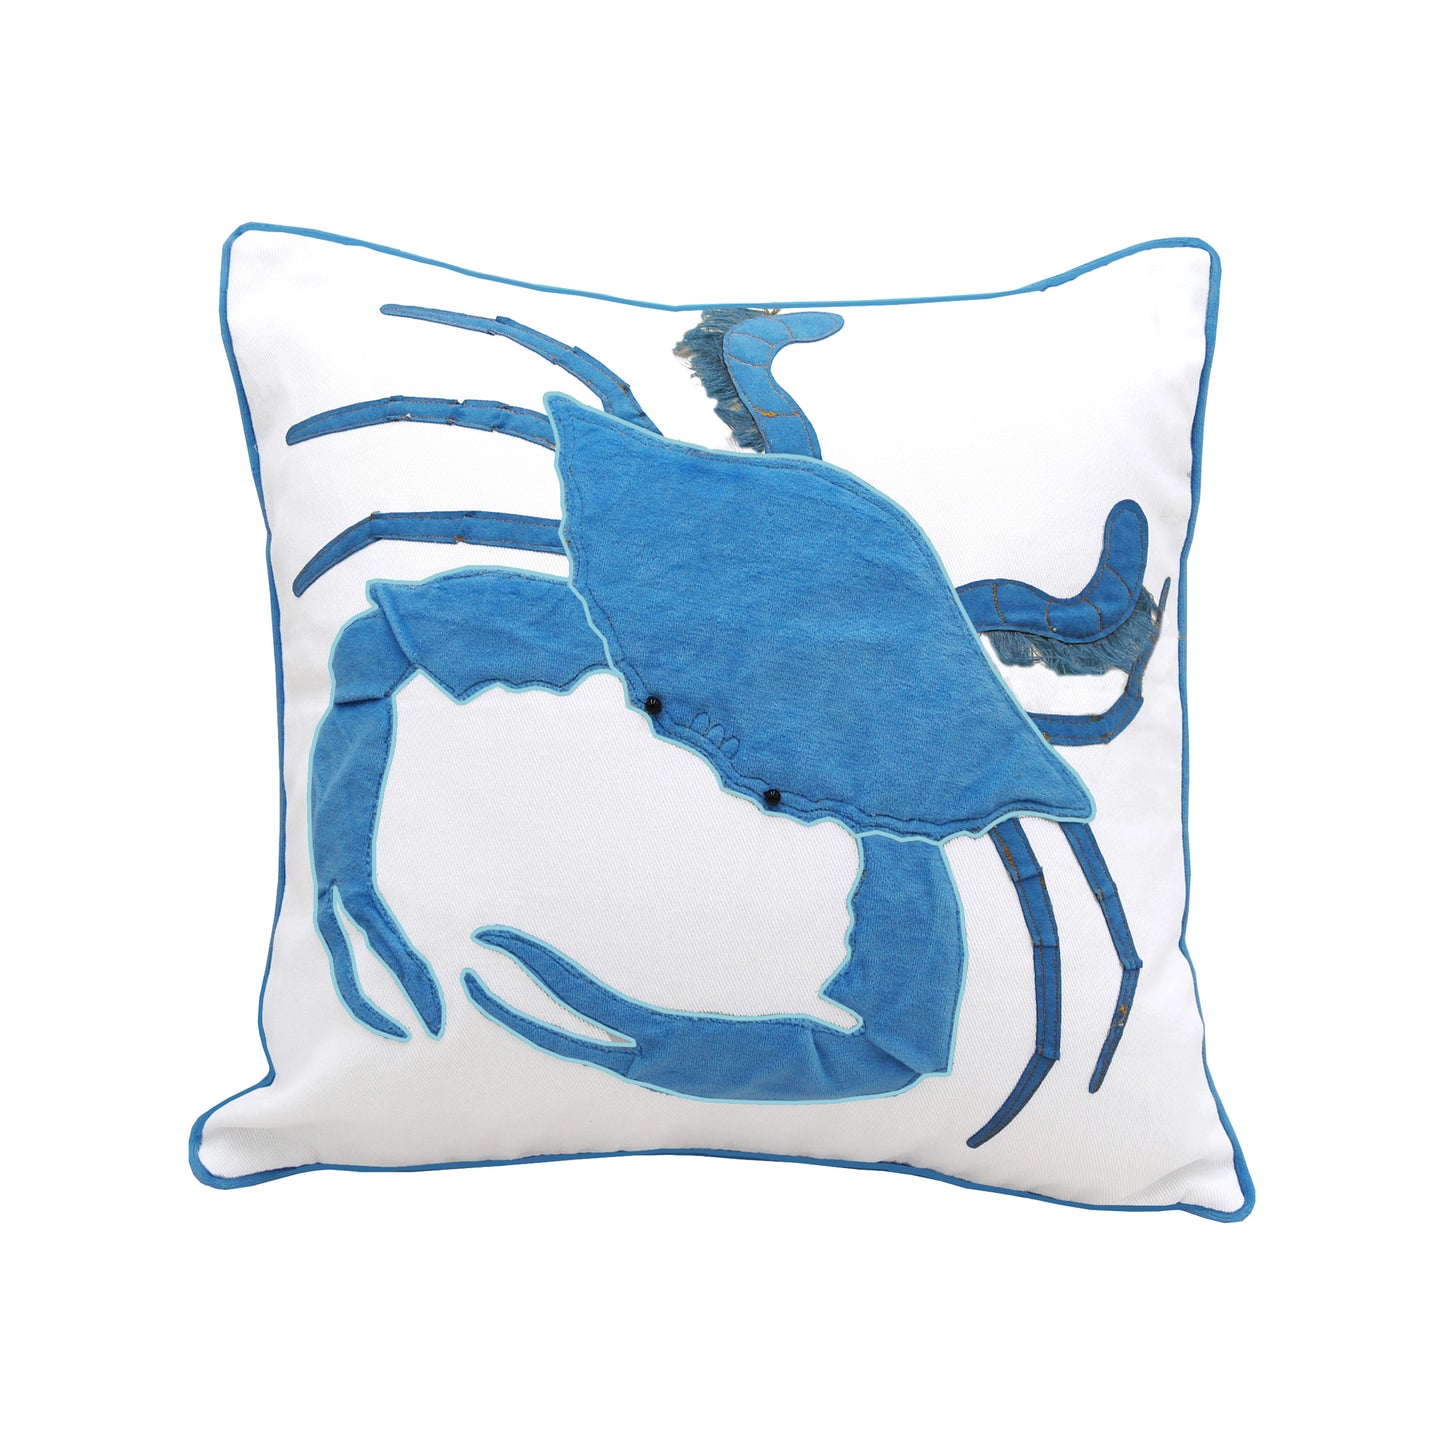 A large velvet Chesapeake blue crab appliqued to a white background. Pillow is finished with blue piped edges, beaded and fringe accents.